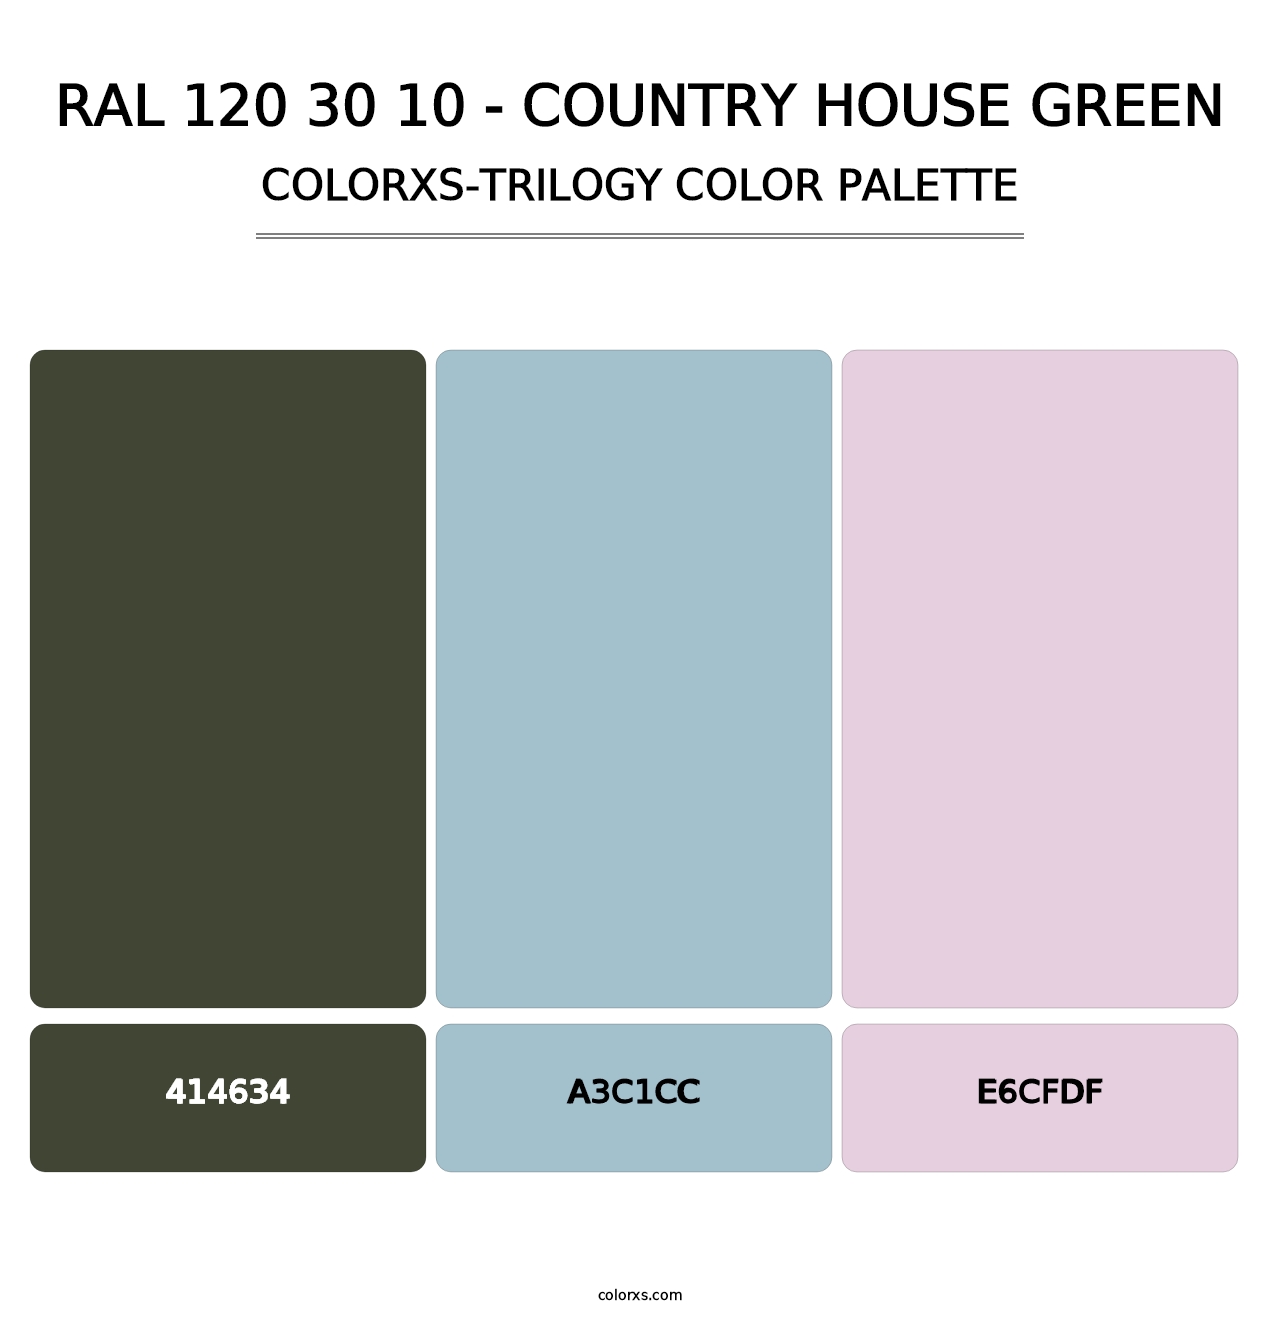 RAL 120 30 10 - Country House Green - Colorxs Trilogy Palette